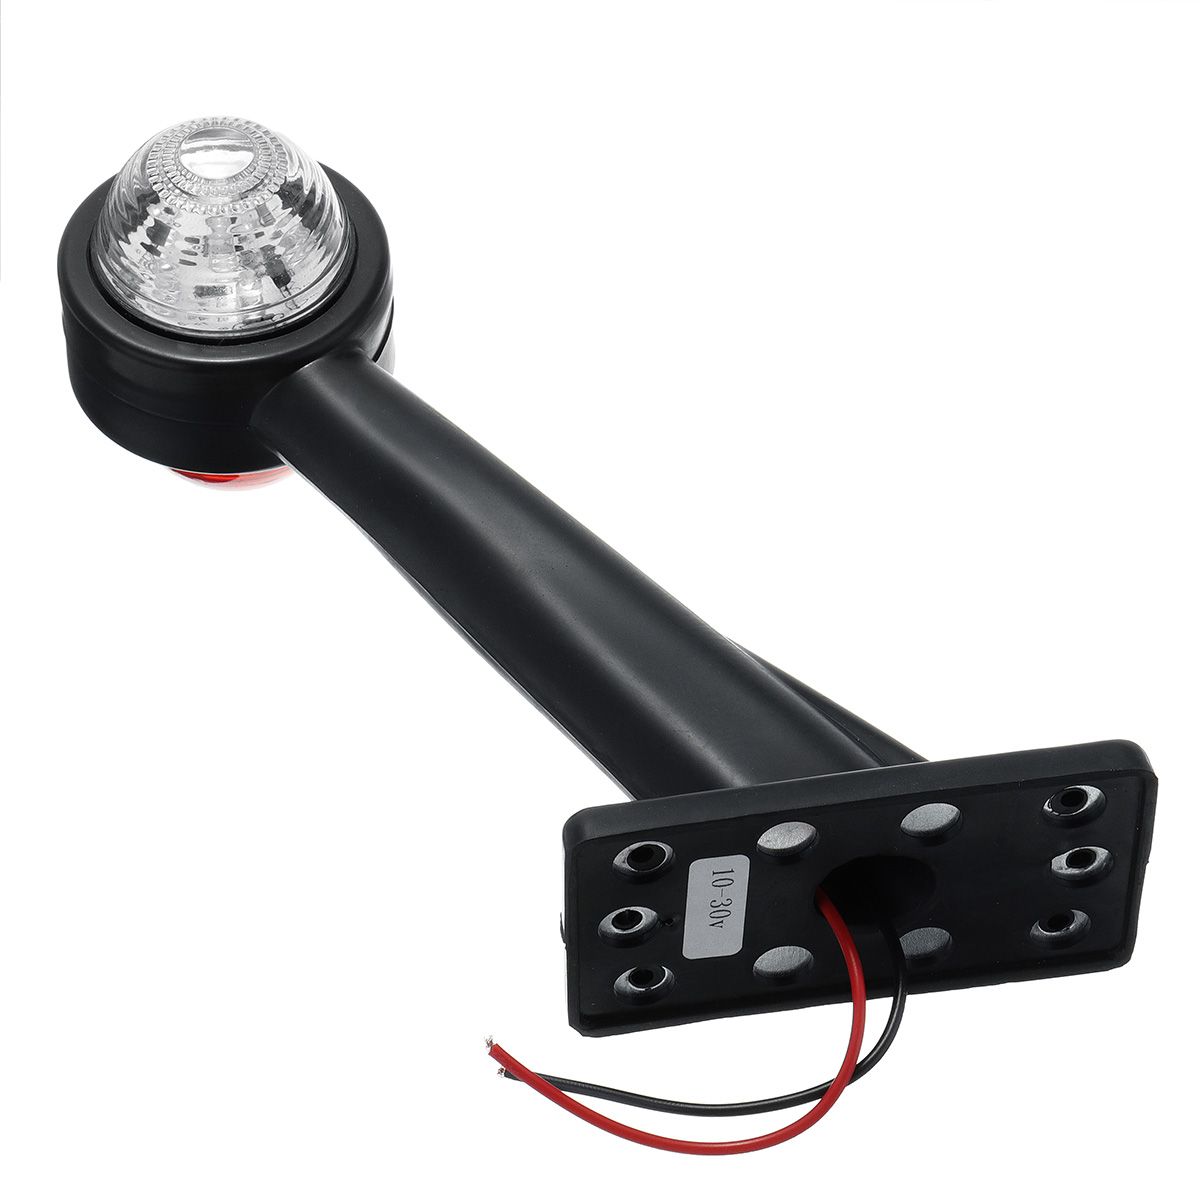 Right-LED-Double-Side-Marker-Clearance-Lights-Turn-Lamp-RedWhite-Color-for-Truck-Trailer-Caravan-1429542